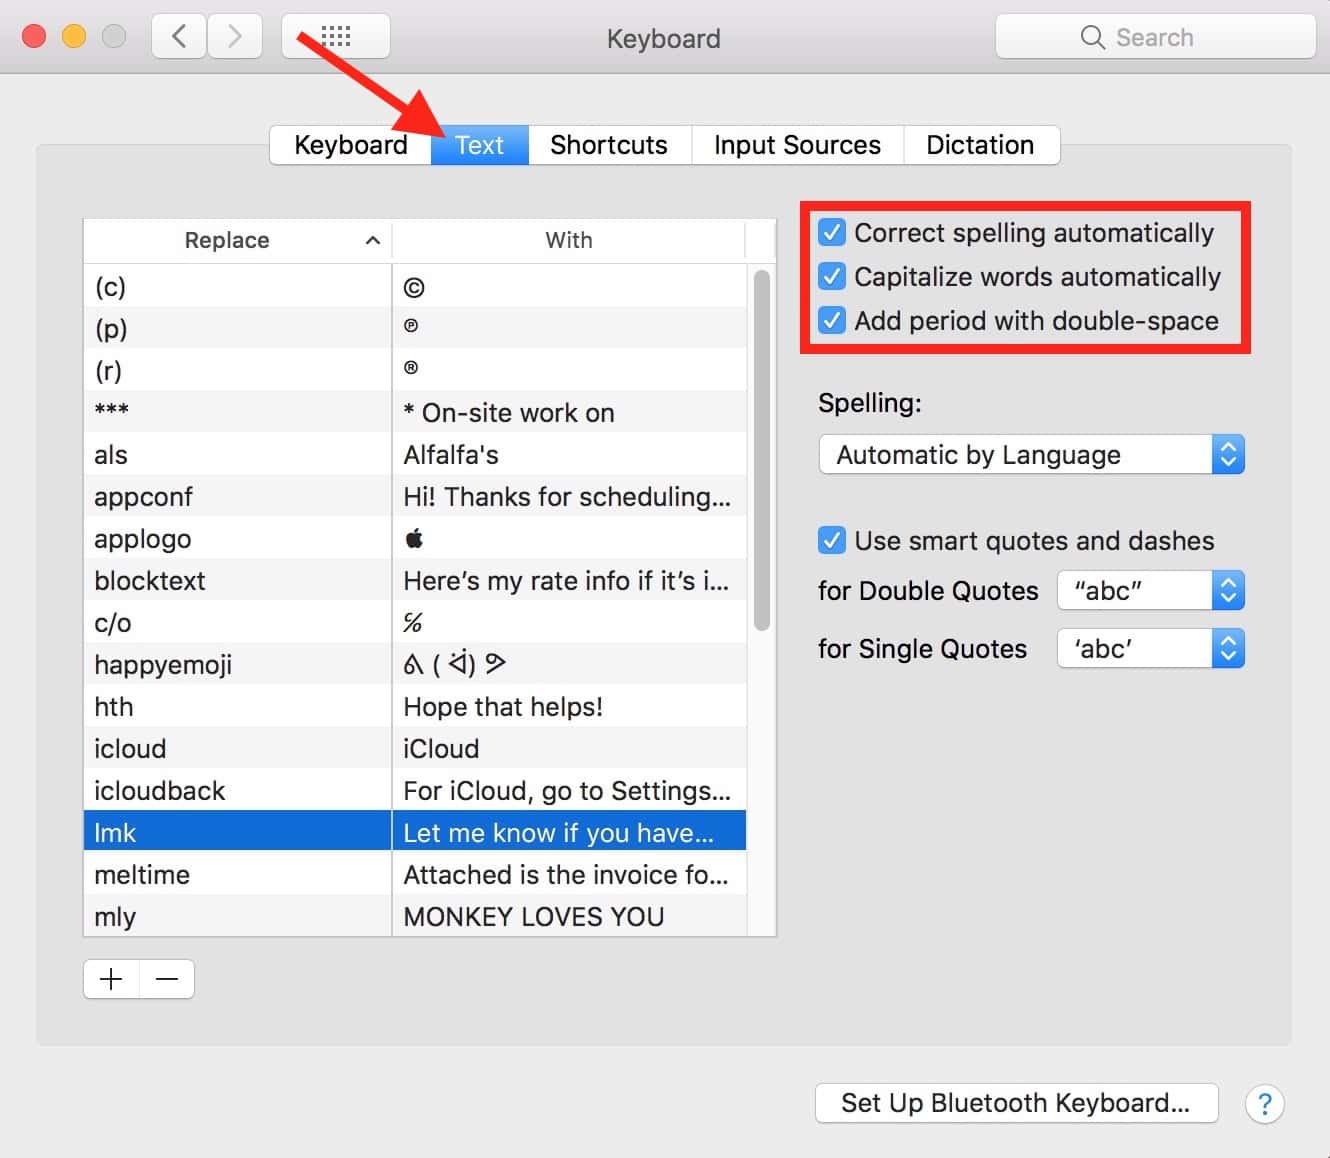 Mac System Preferences for Keyboard Settings with auto-spelling and auto-capitalization active